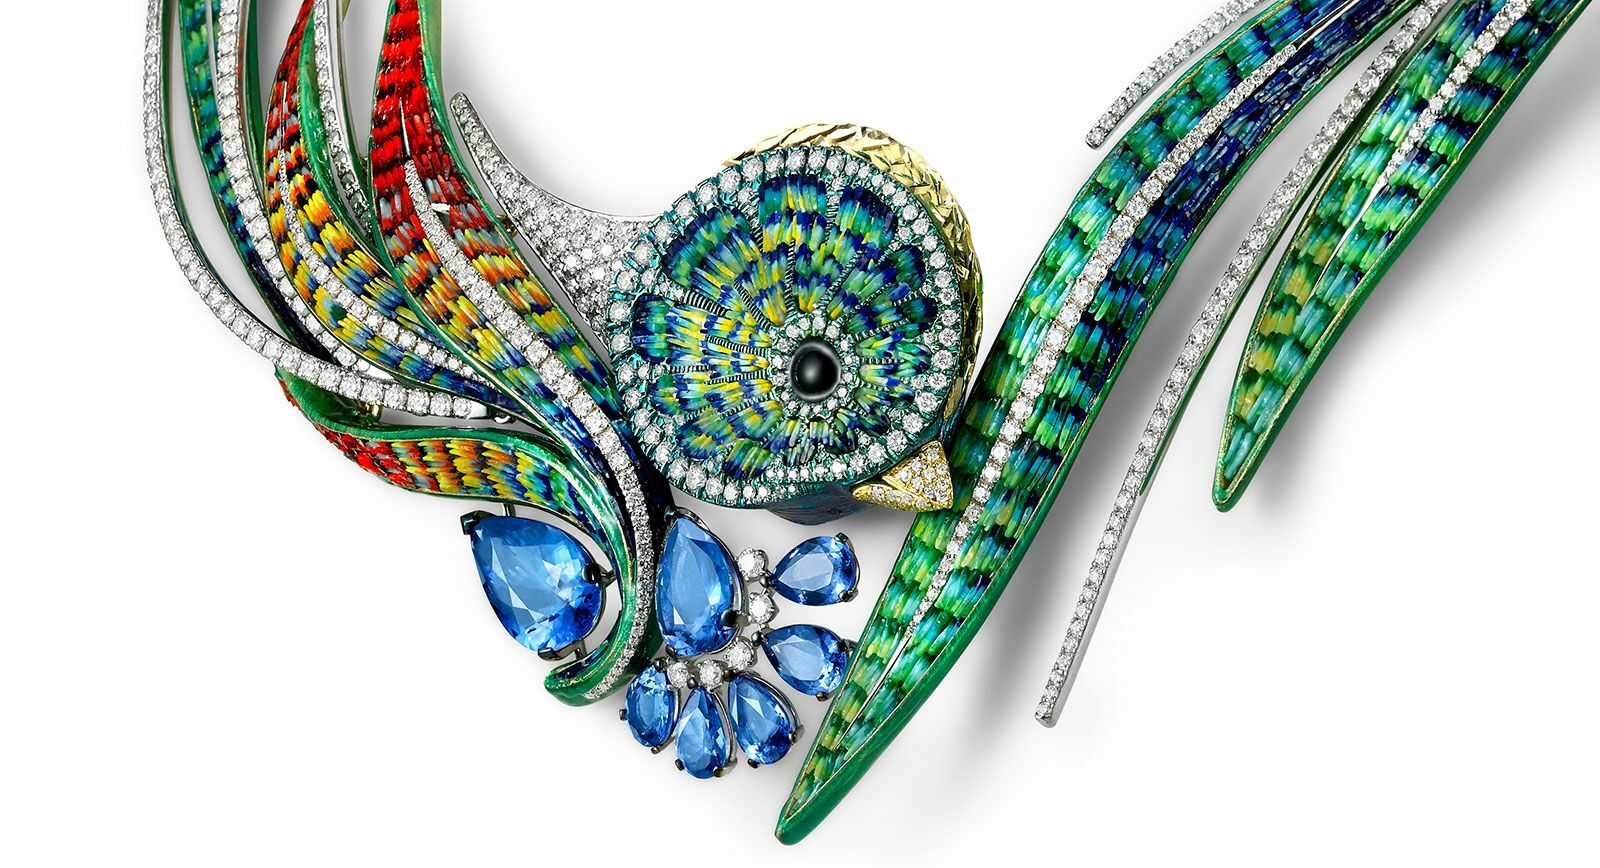 The Quetzal Necklace: a Continuation of the Eponymous Surreal Jewellery Line From Sicis